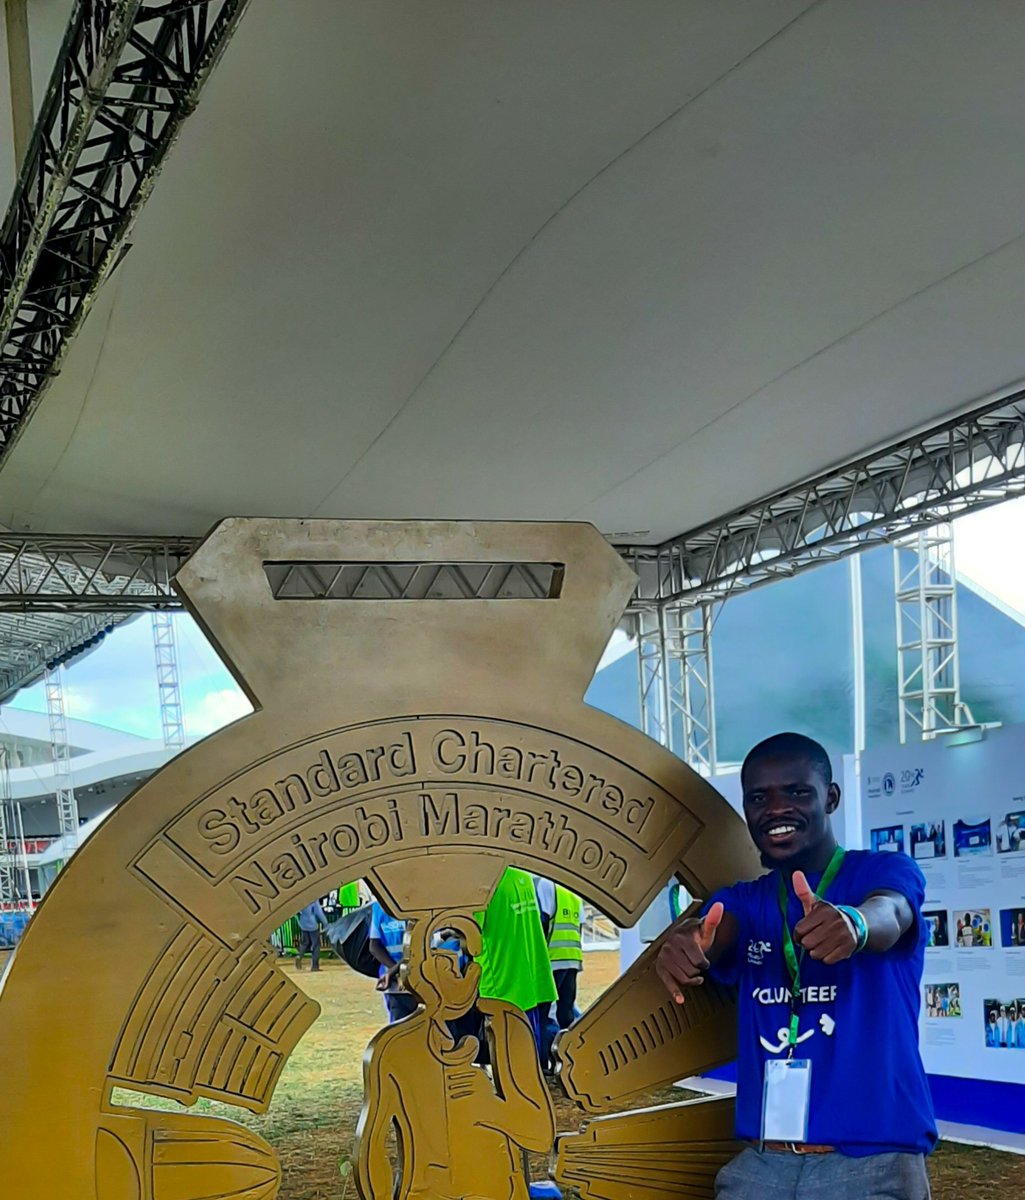 Scenes from the 20th Edition of Starndard chartered Nairobi Marathon which took place on Sunday 29th October at Uhuru Gardens. Glad to have been part of the planning team and also being the team leader of the volunteers! #RunAsOne #RunForAReason #StanChartNairobiMarathon2023